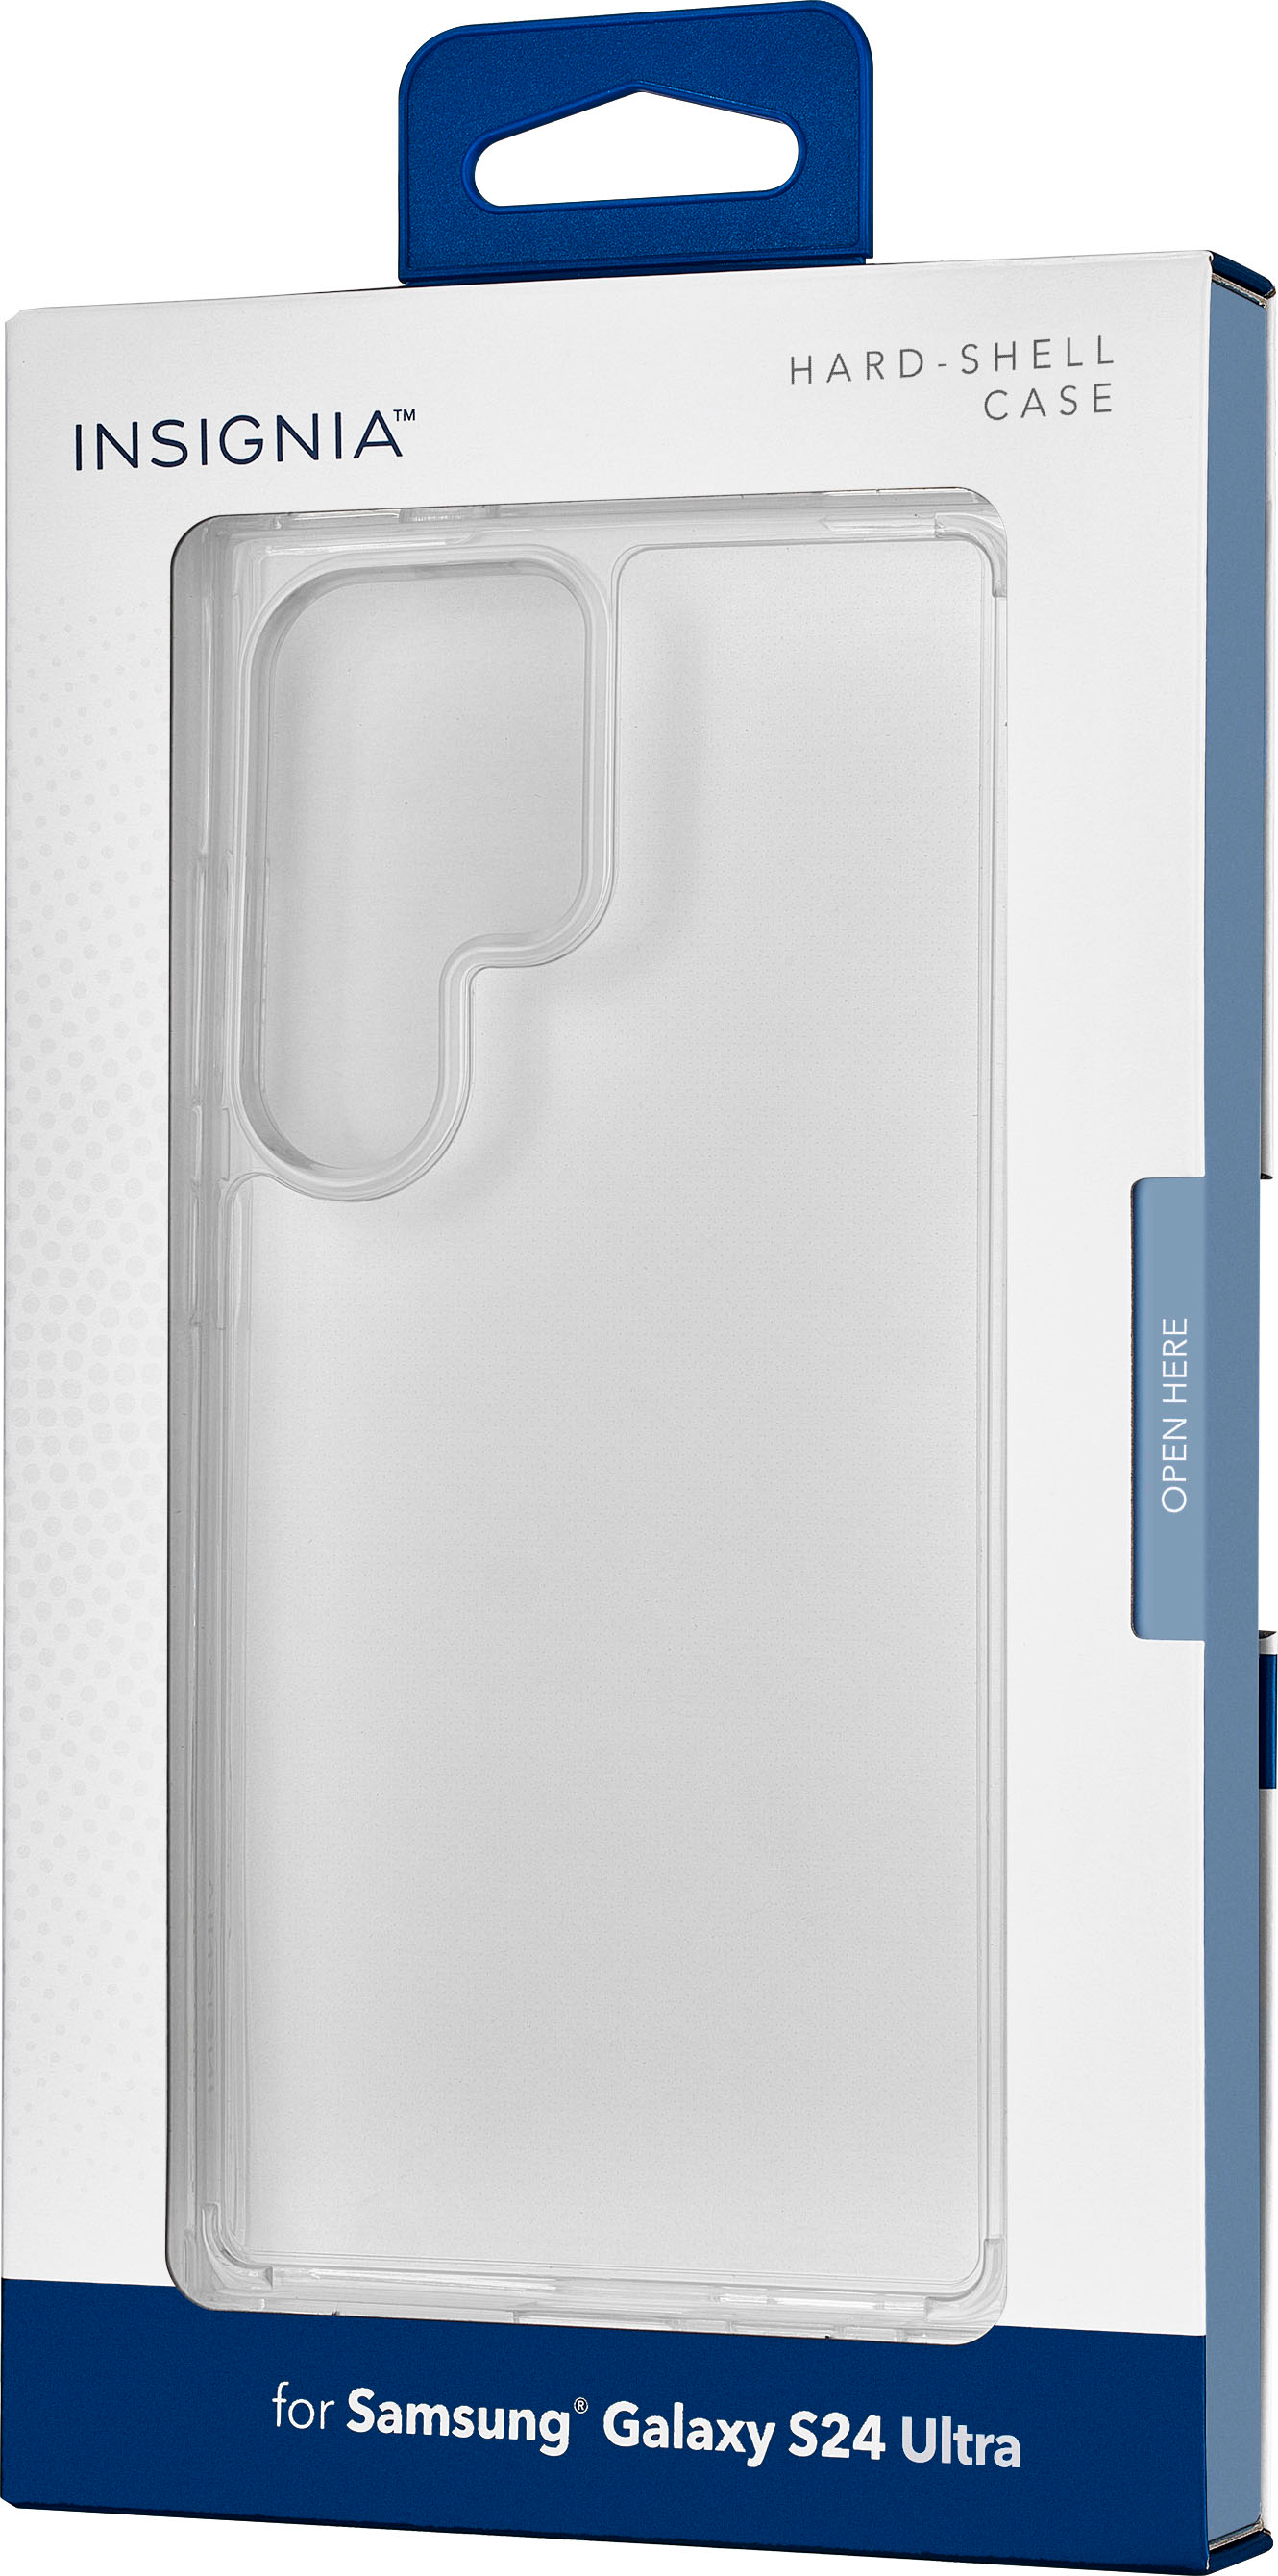 Insignia - Hard-Shell Case for Samsung Galaxy S24 Ultra - Clear